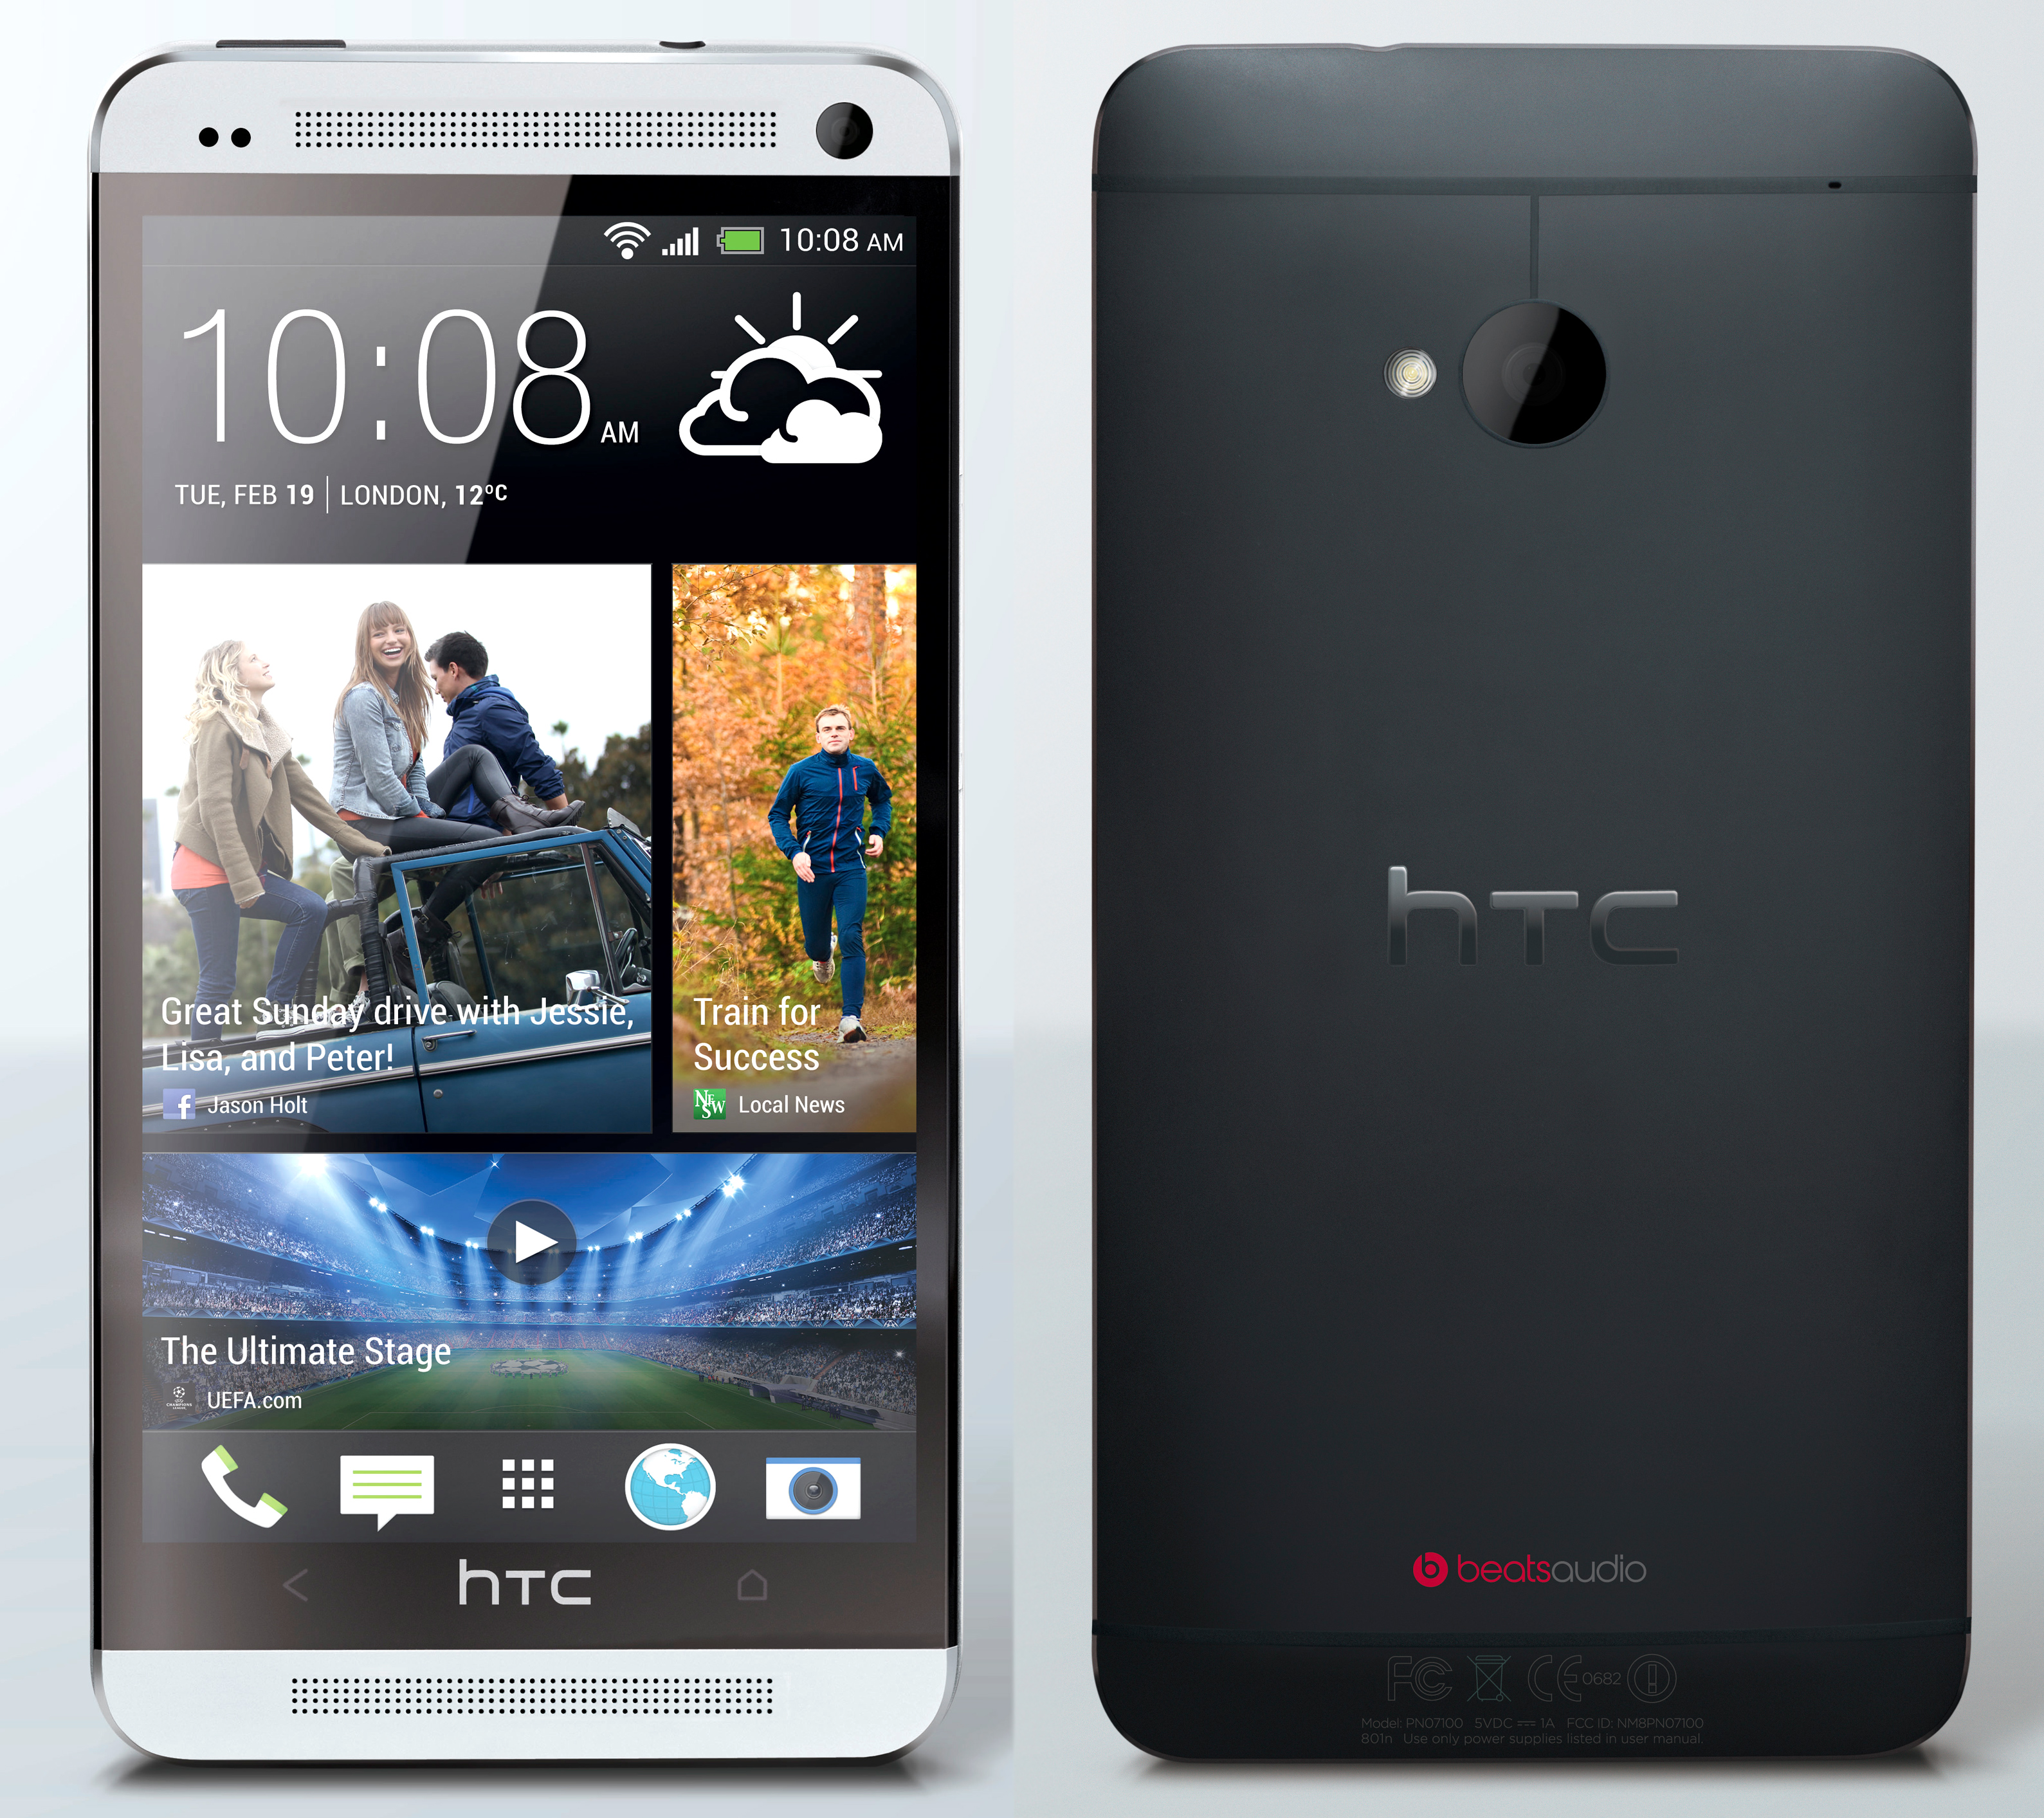 The HTC One Targets iPhone Market